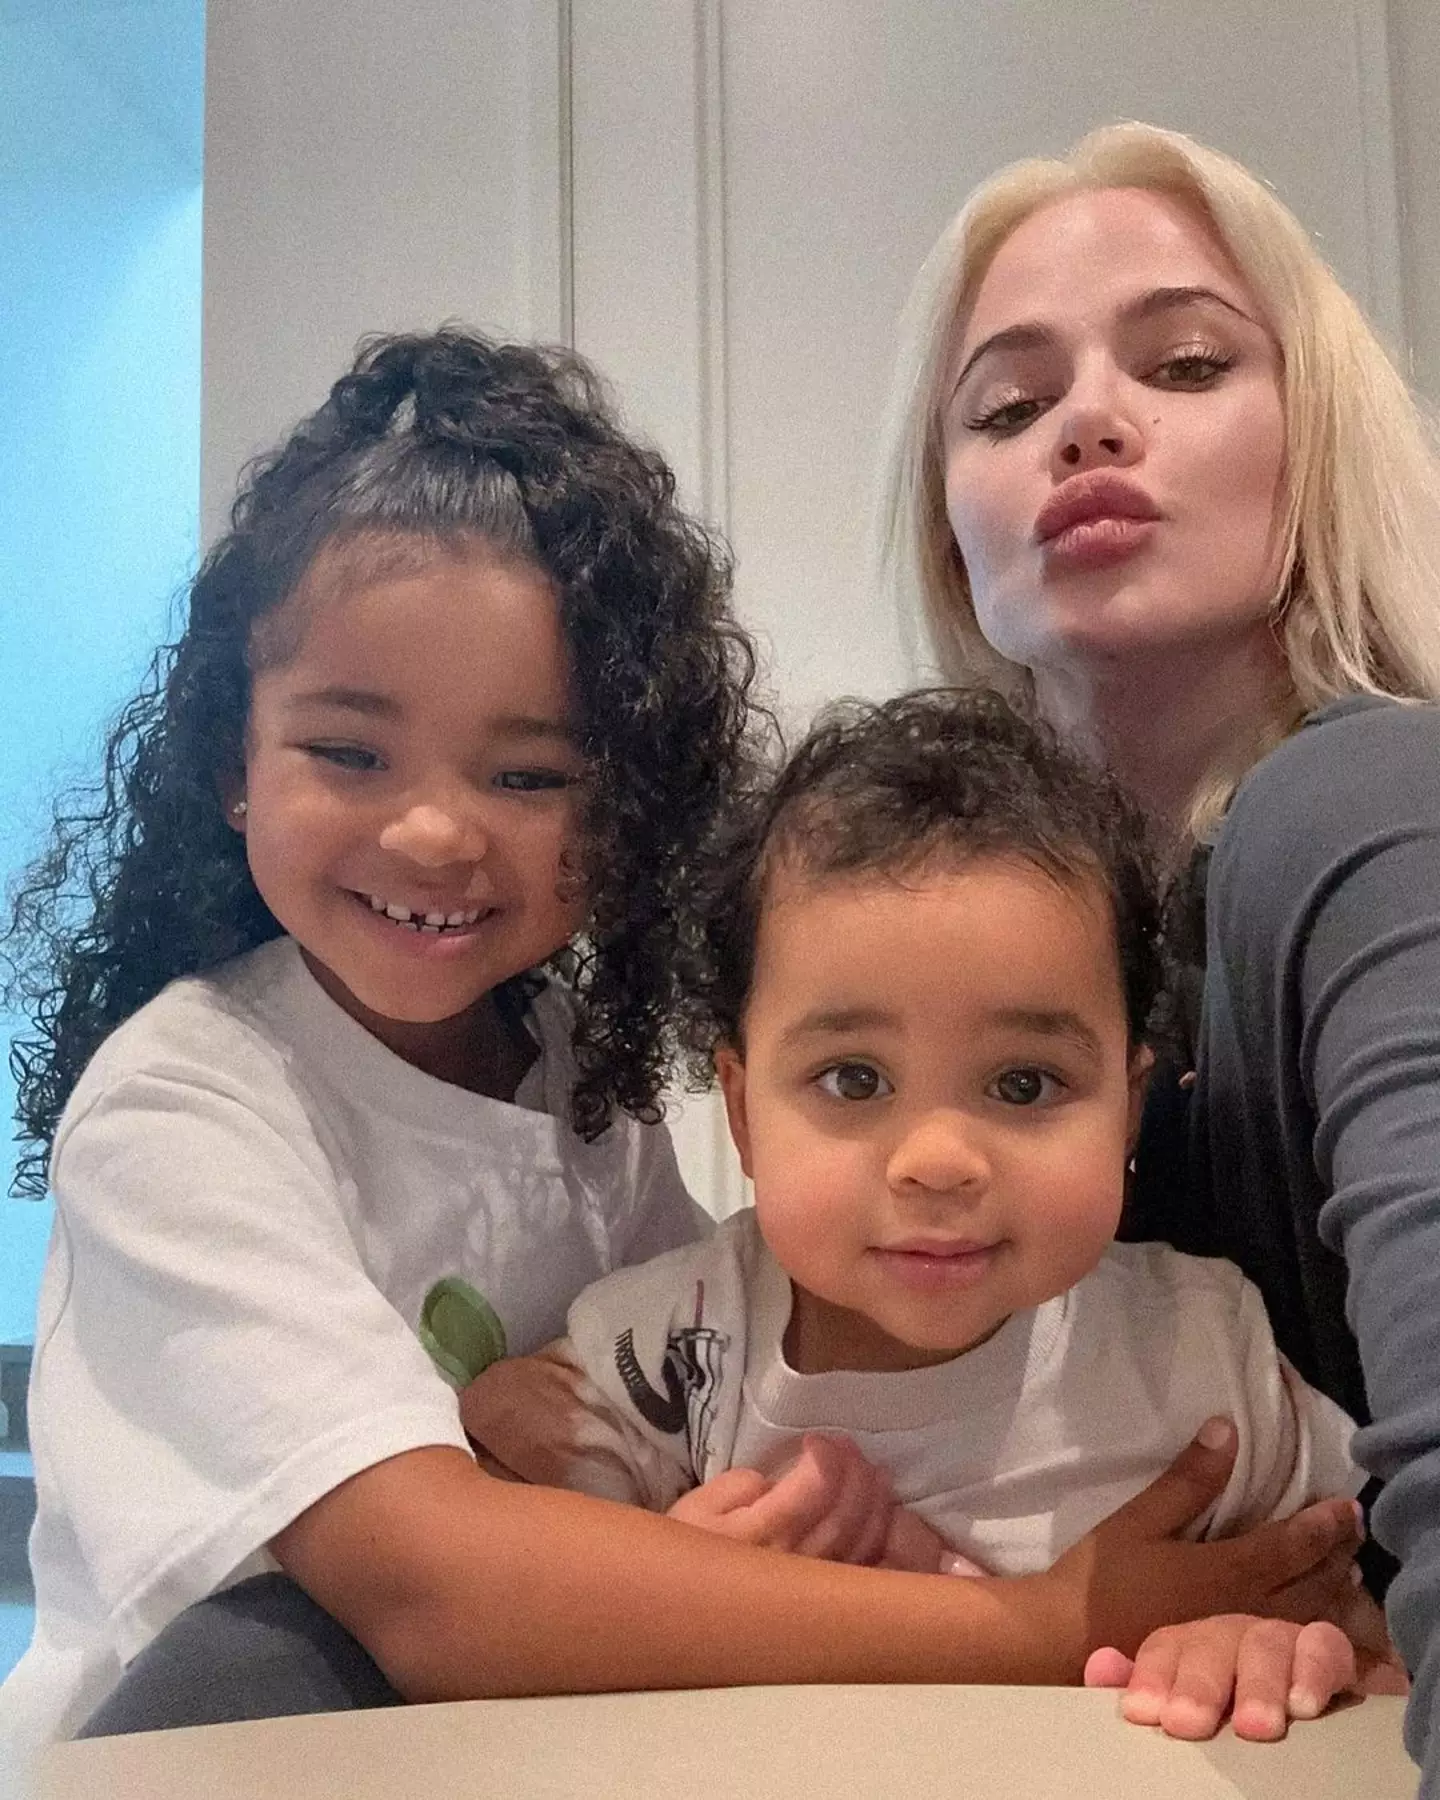 Khloe is also mum to five-year-old True.